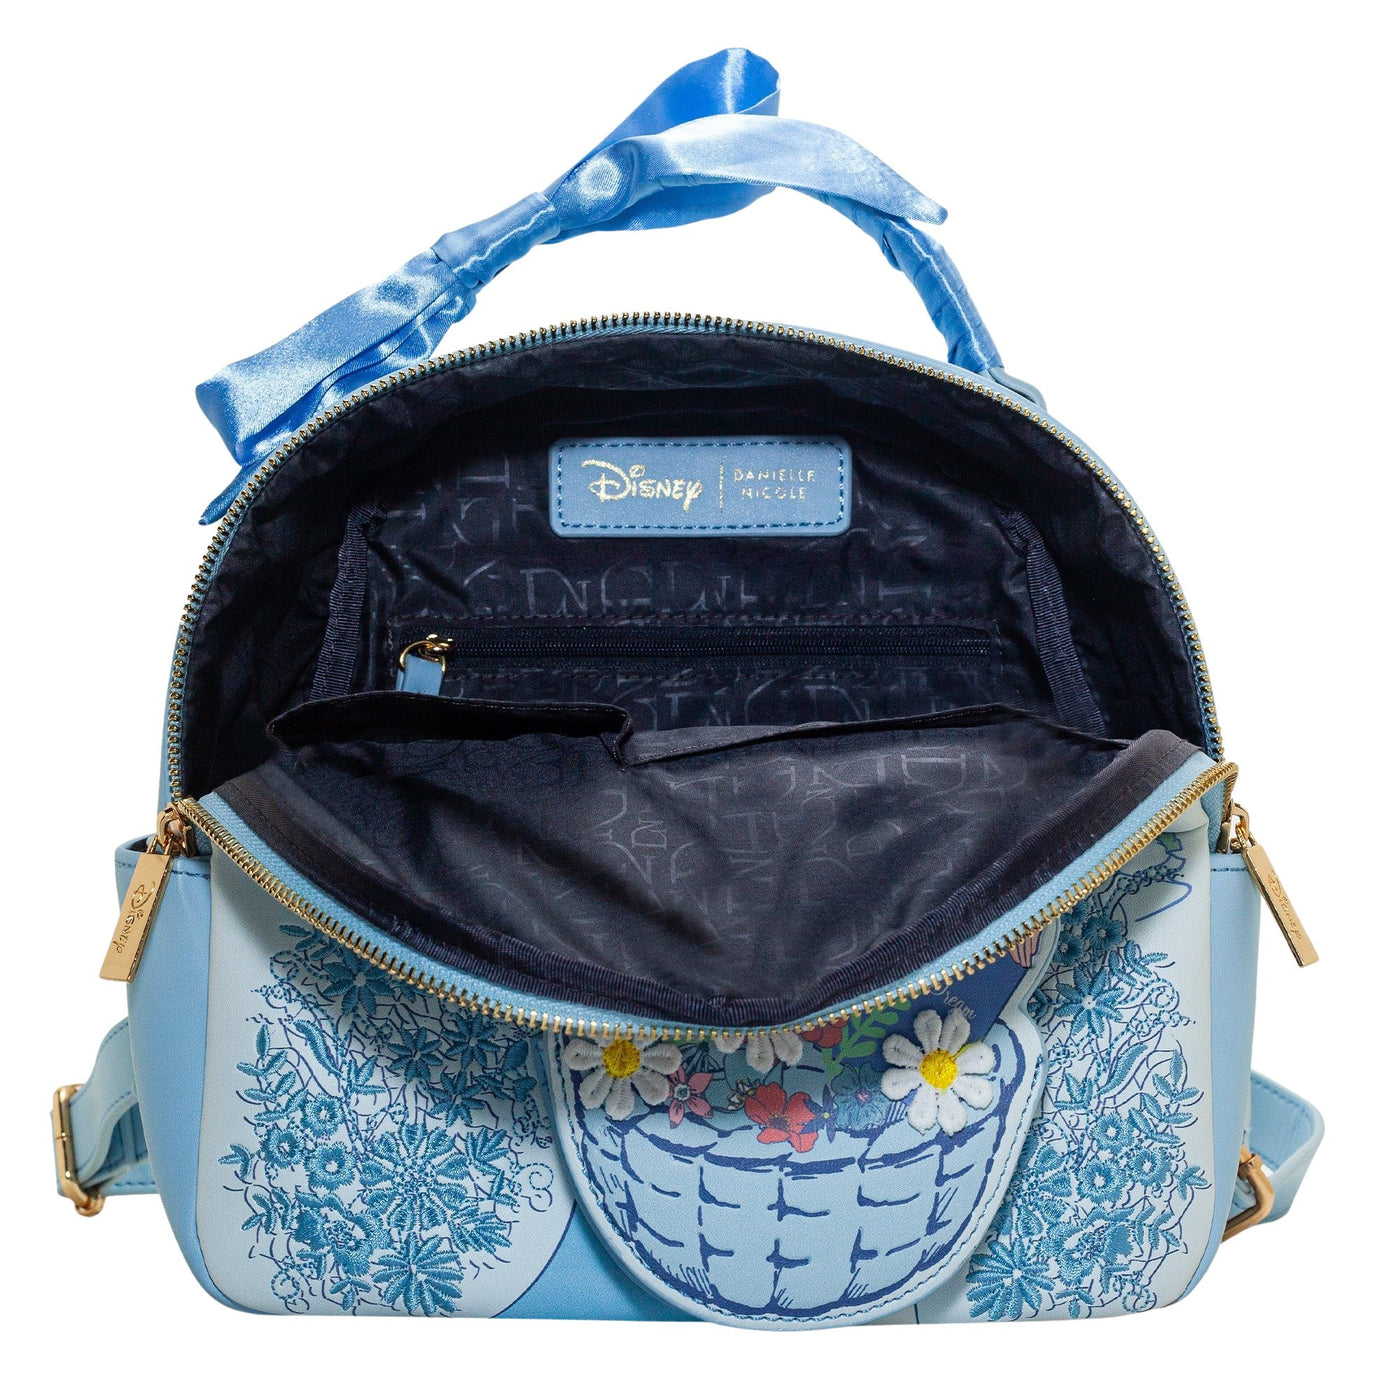 Danielle Nicole Disney Beauty and the Beast Belle Basket Backpack-LINING